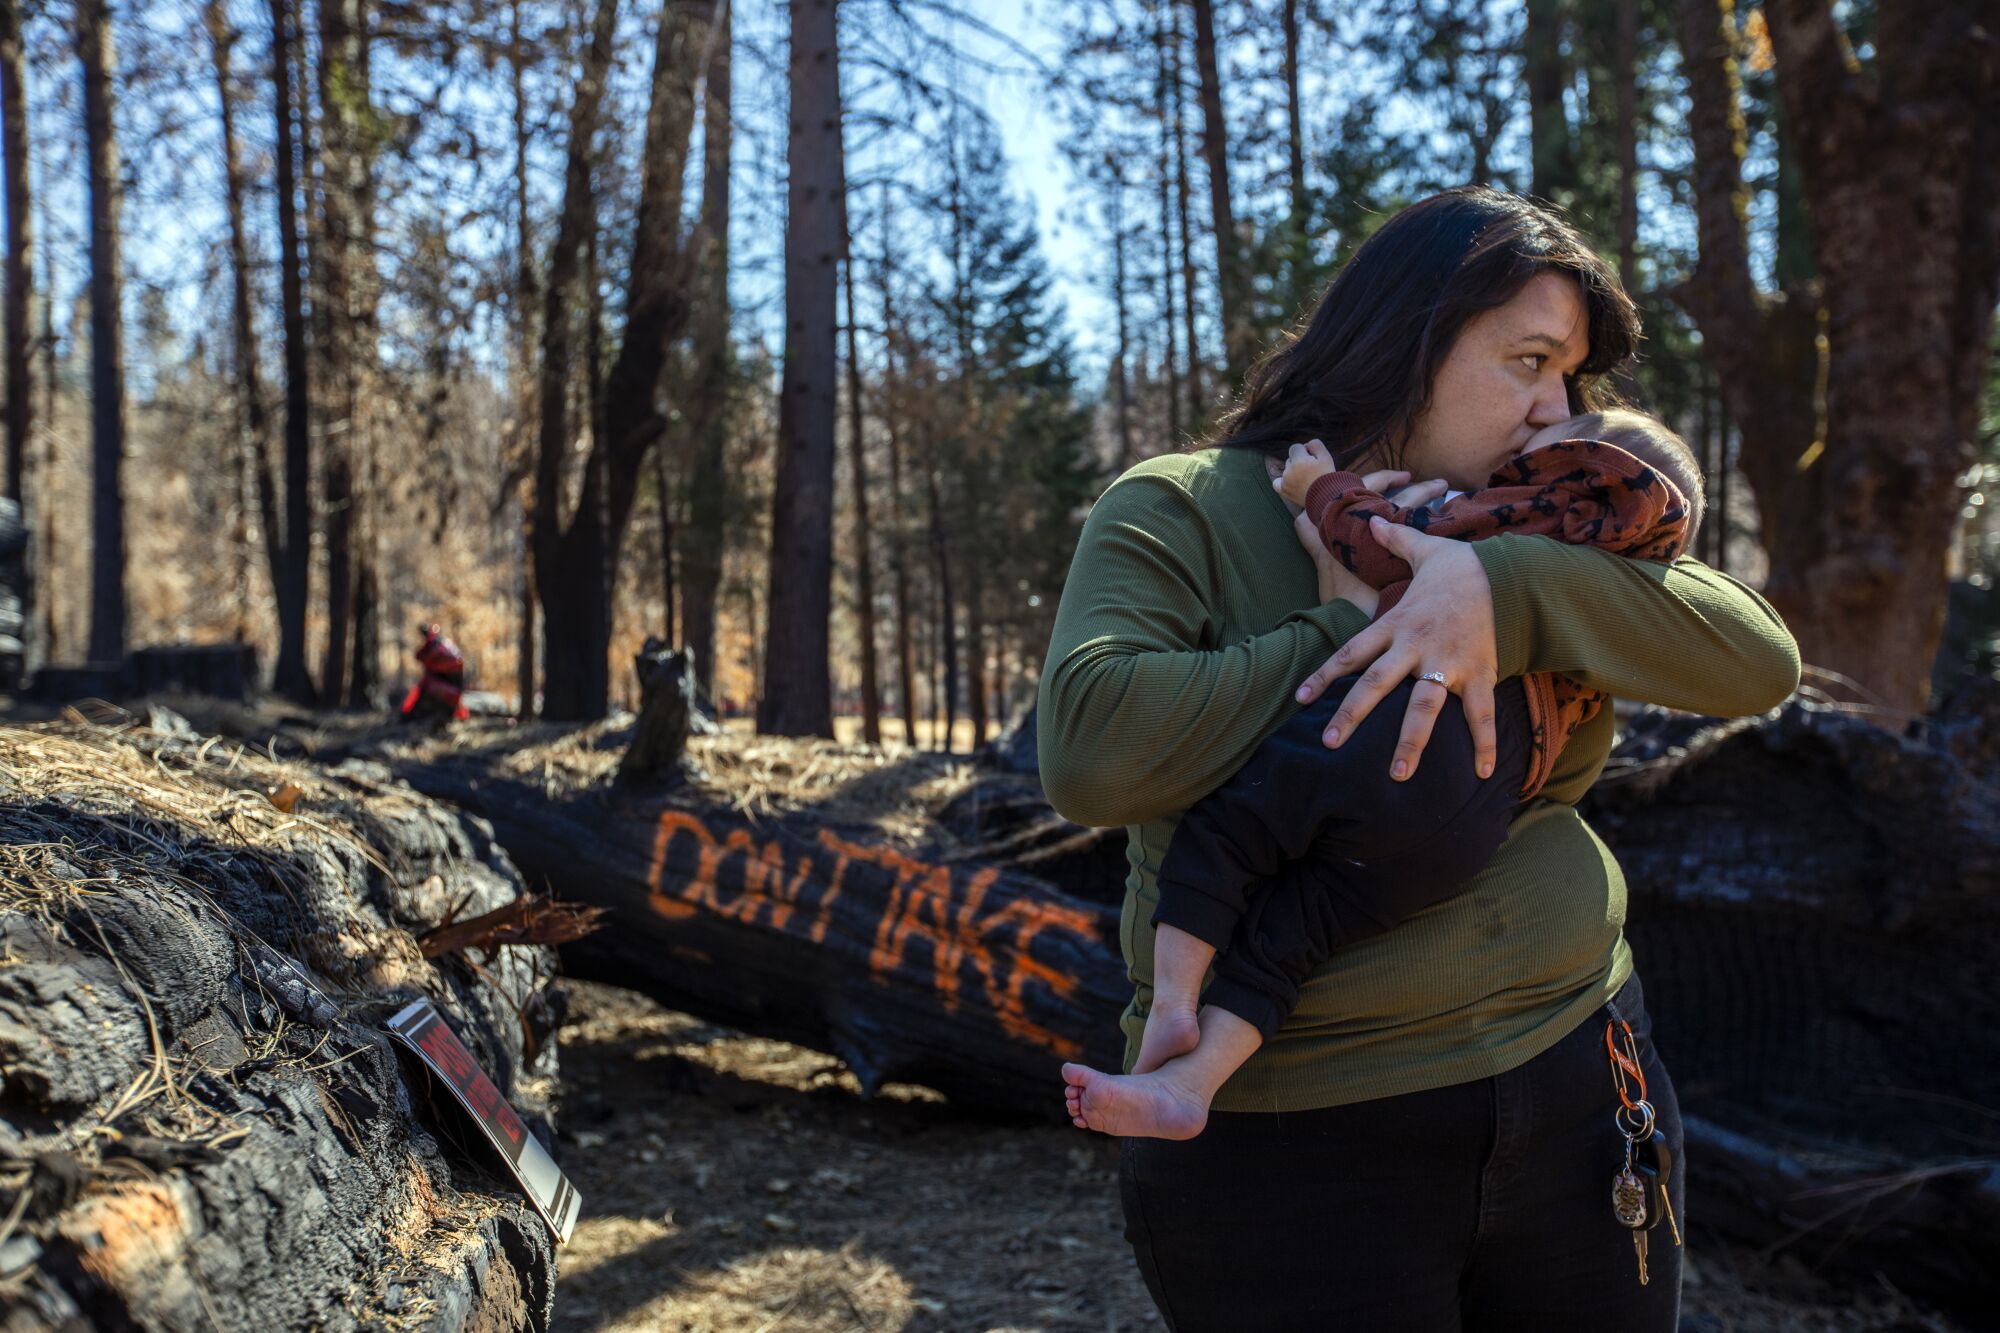 A woman kisses a baby she is holding amid wildfire damage.